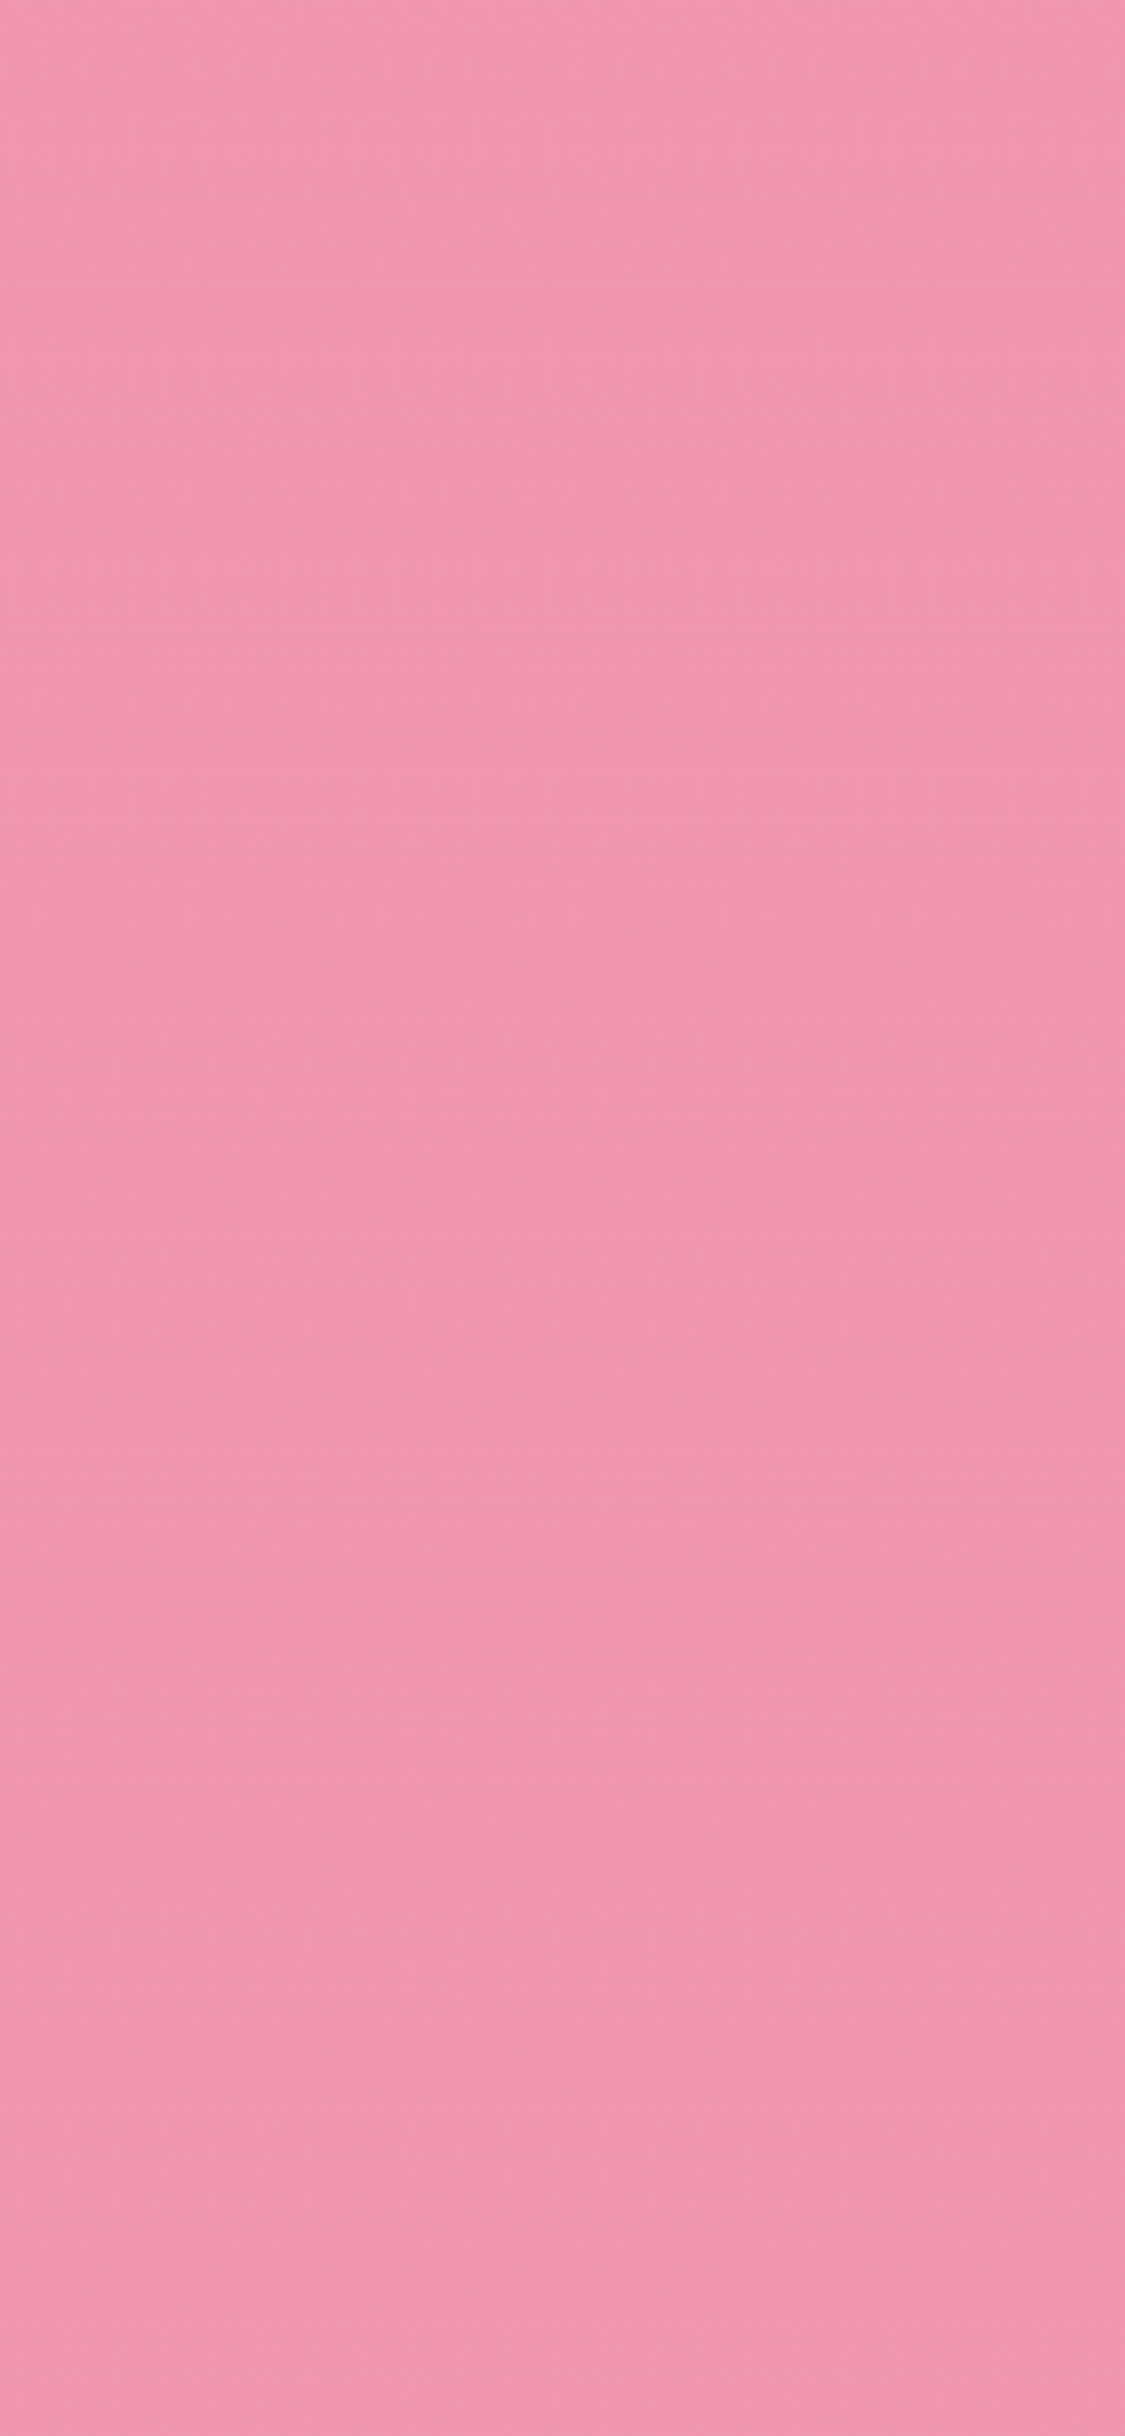 Pink Solid Color Wallpapers - Top Free